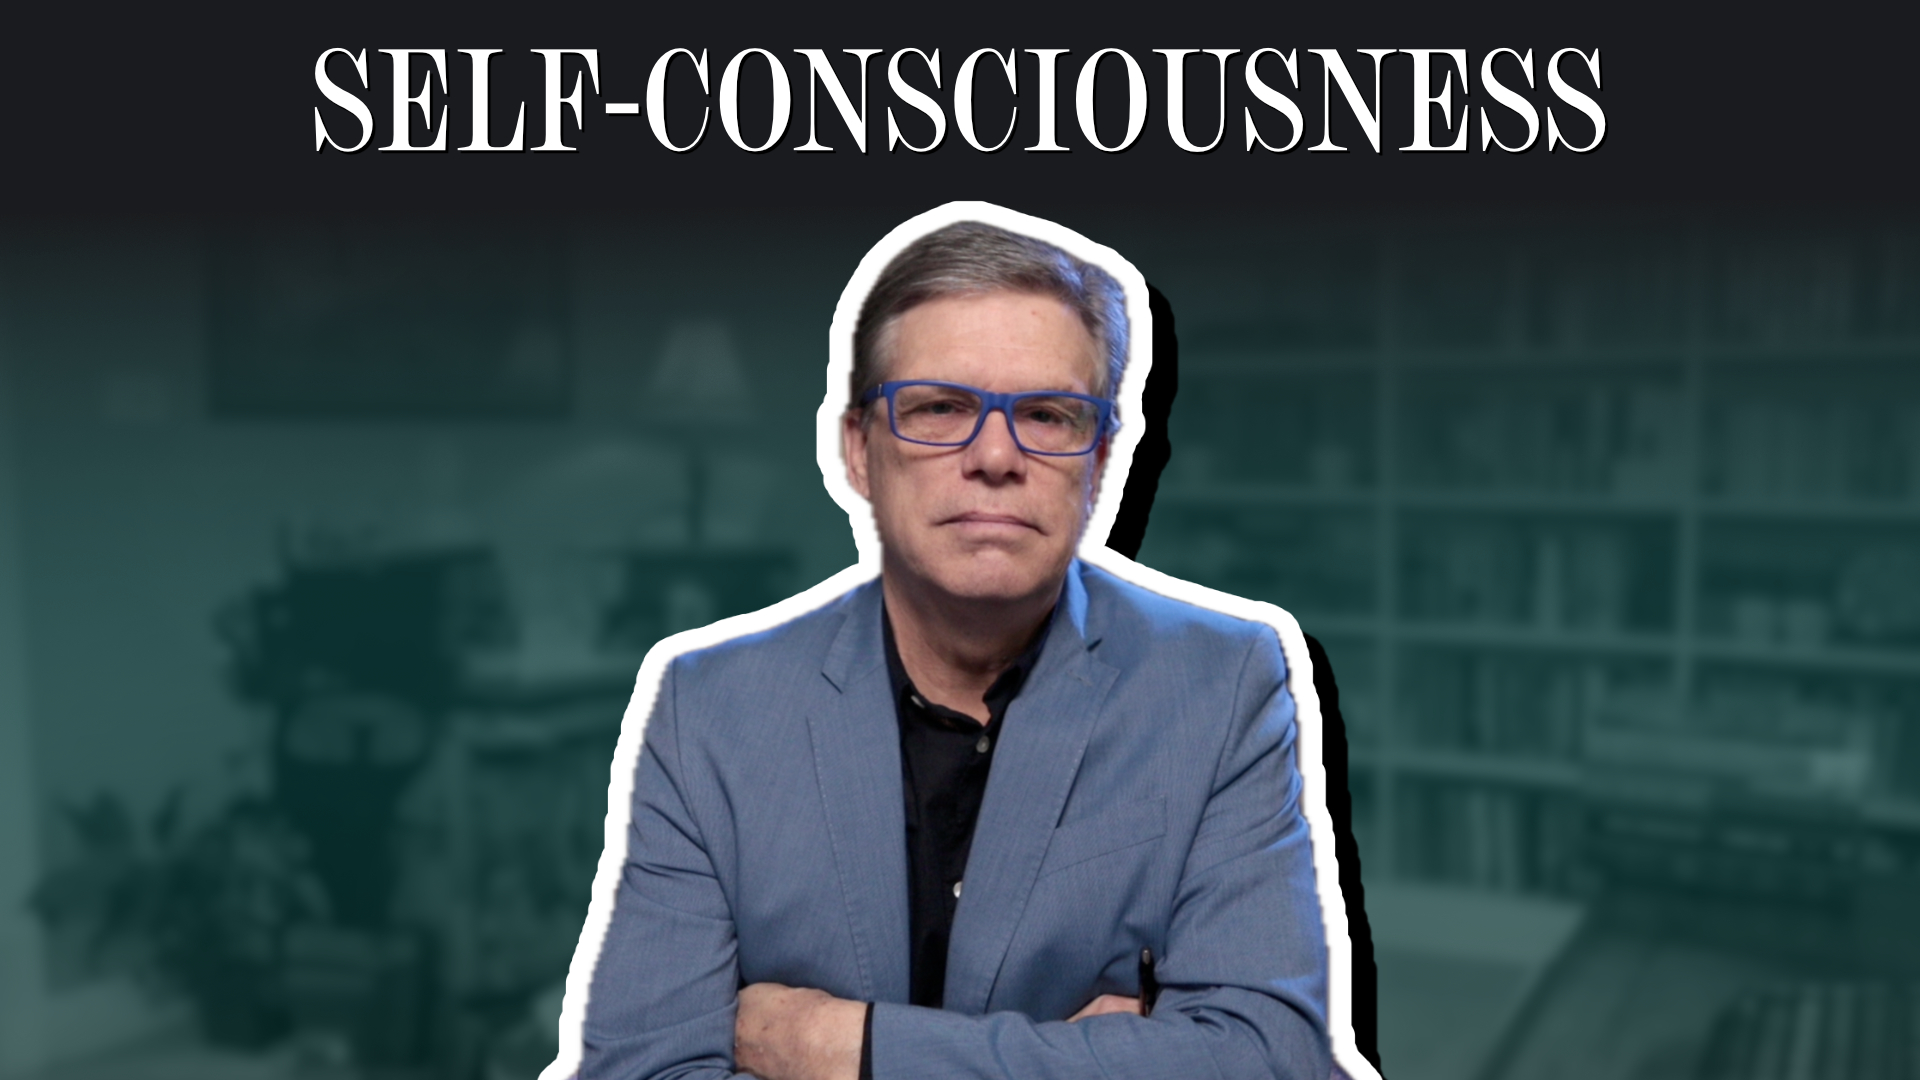 Self-Consciousness: Are you really sure you wanna go there?